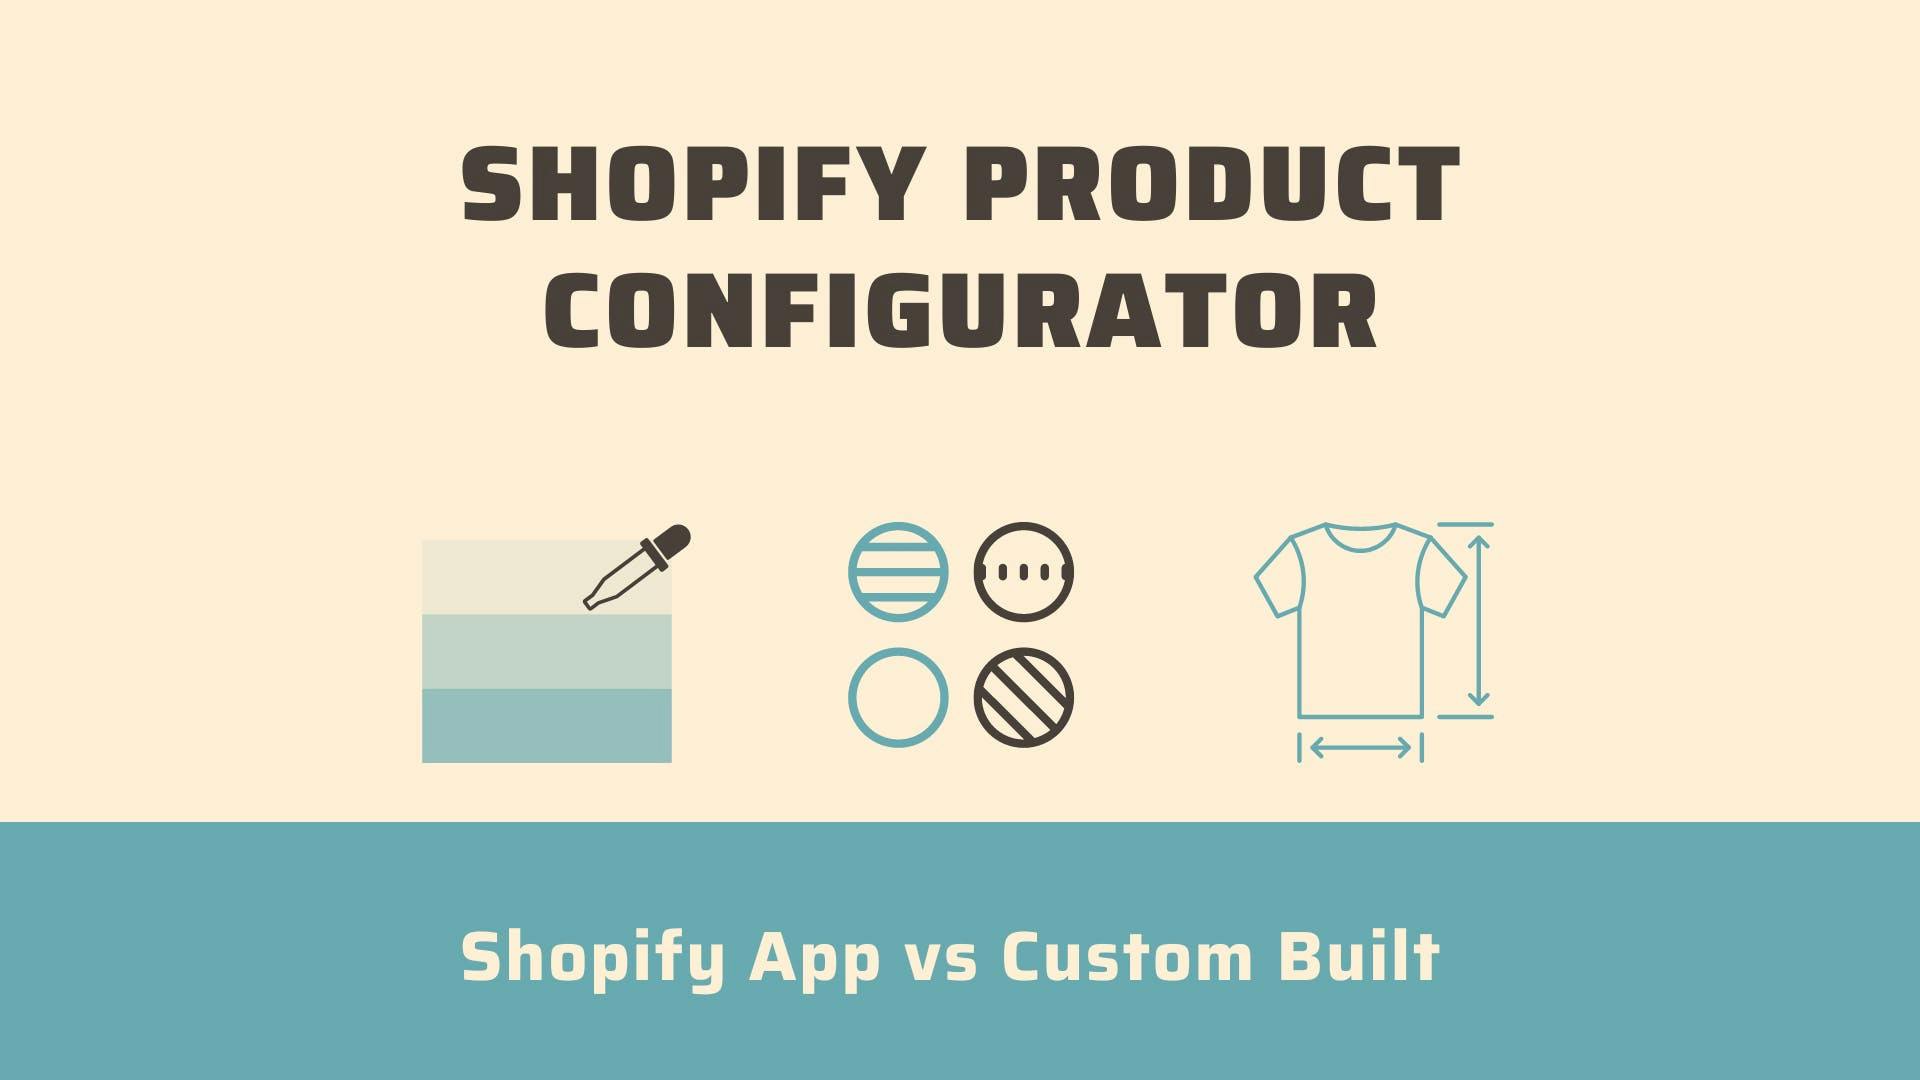 Shopify Product Configurator